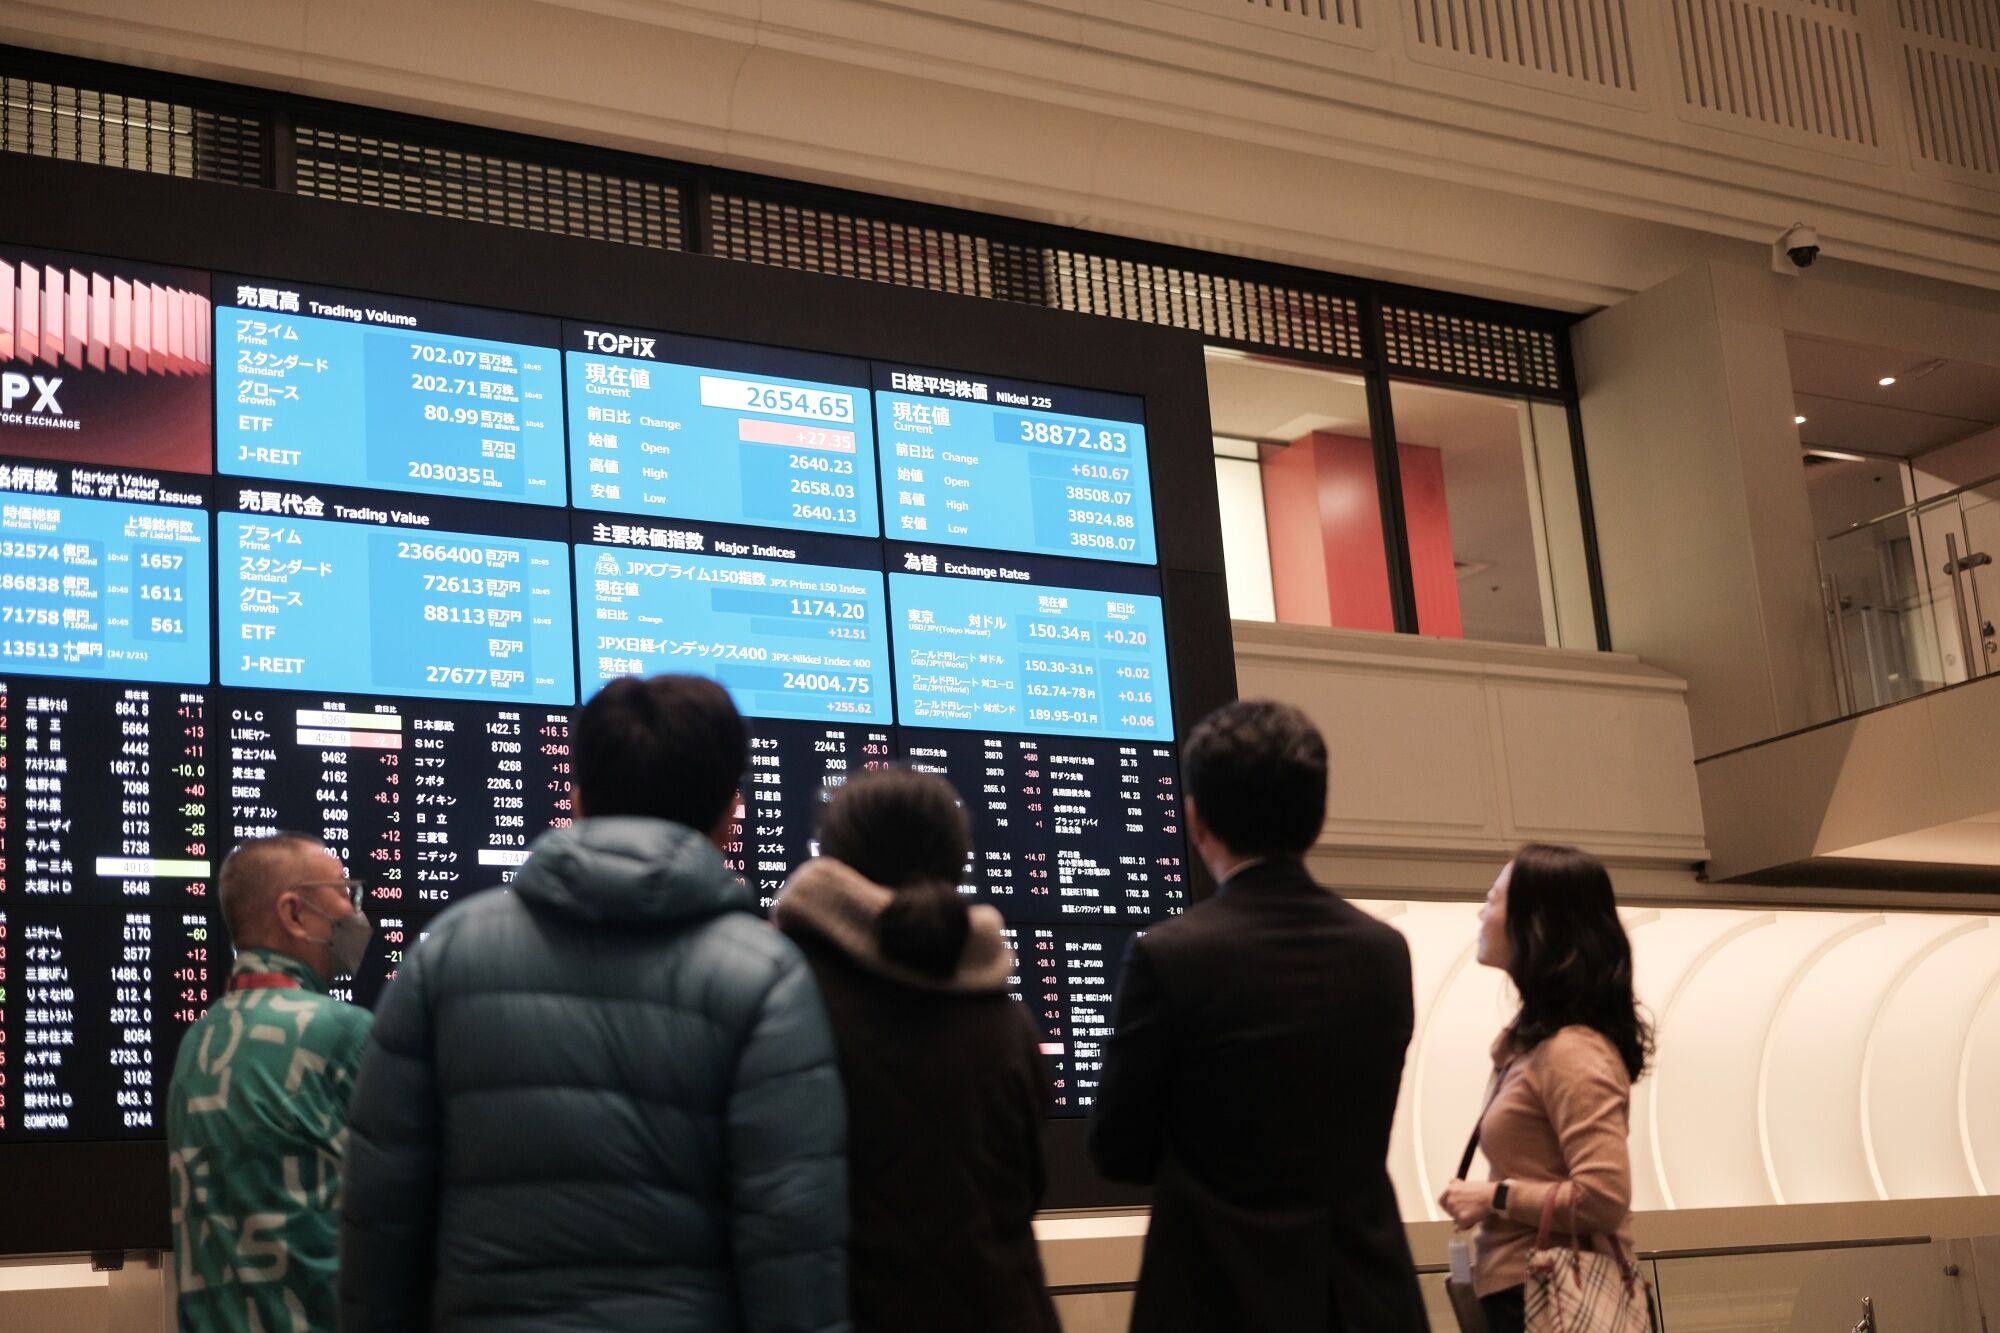 An electric stock board at the Tokyo Stock Exchange in Tokyo, on February 22. The Nikkei 225 has risen to all-time highs in recent trading sessions. Photo: Bloomberg